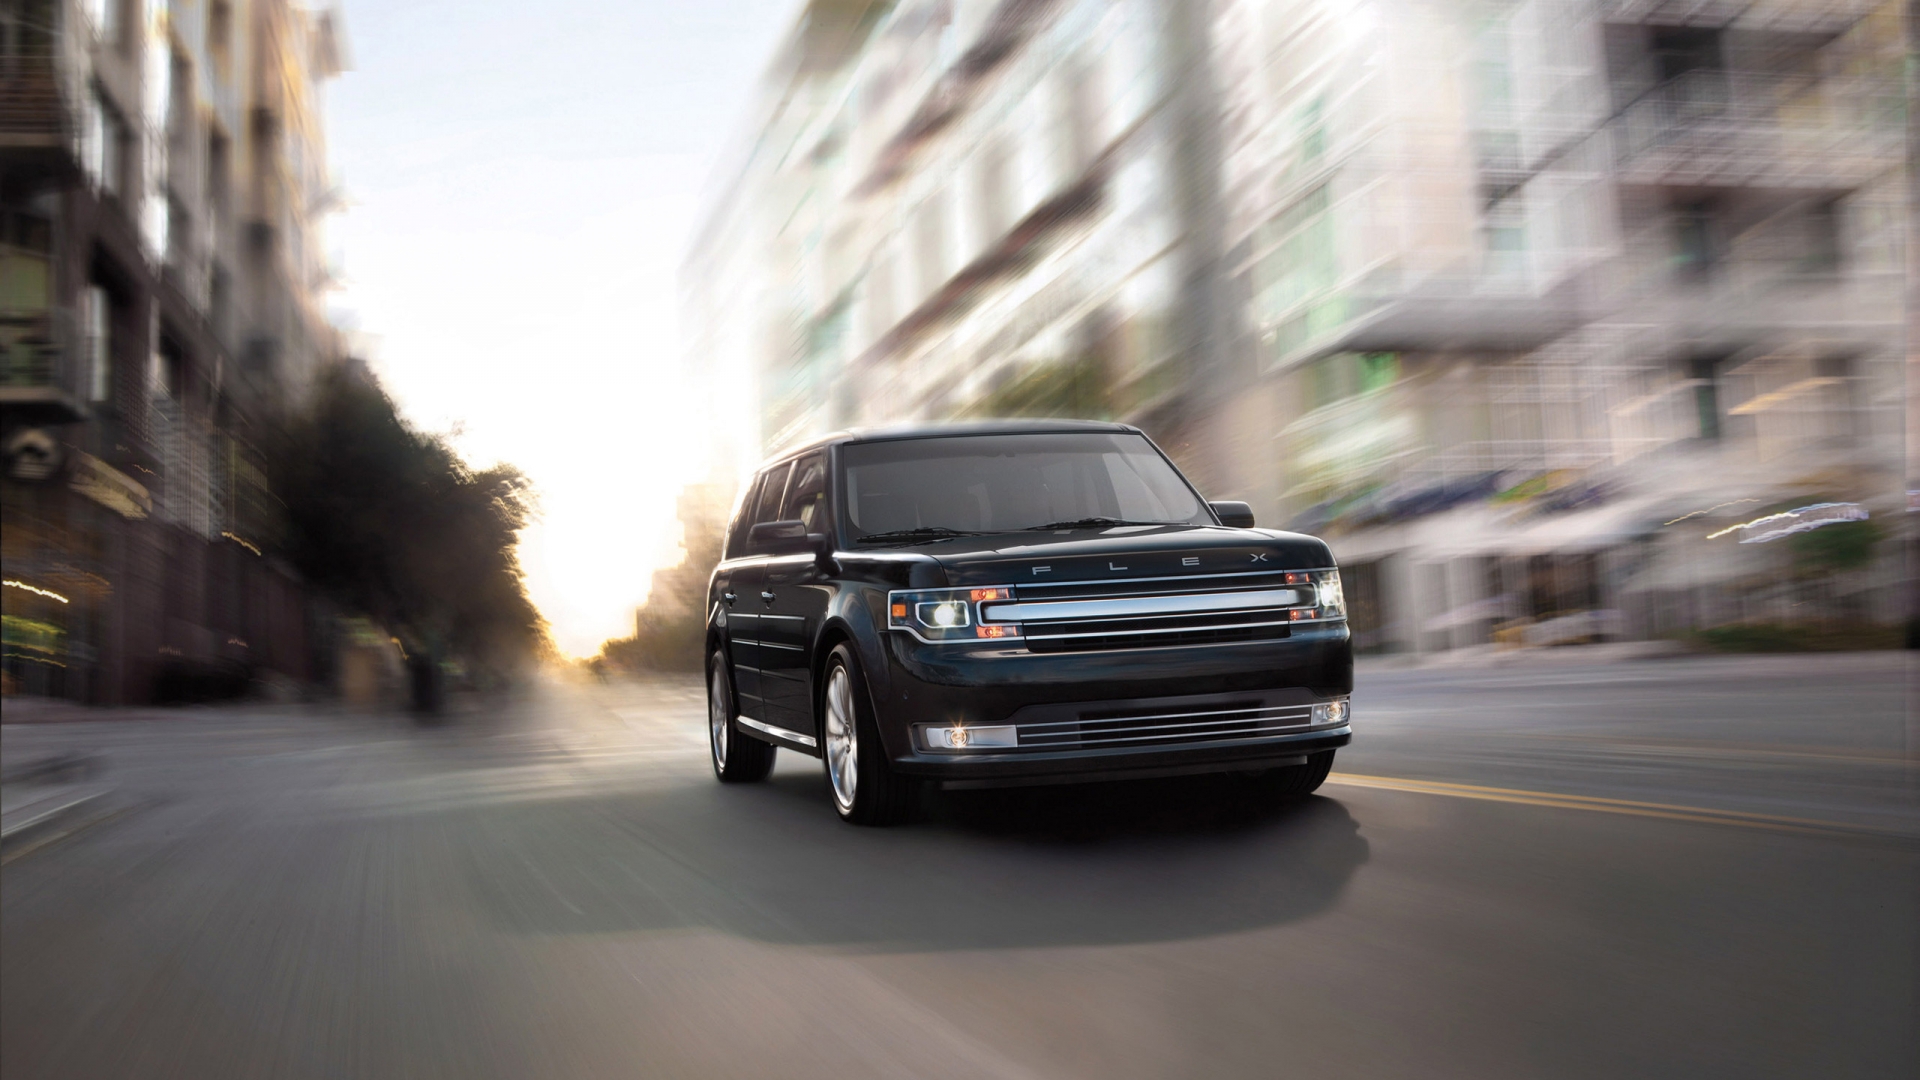 Speed with Ford Flex Model 2013 for 1920 x 1080 HDTV 1080p resolution